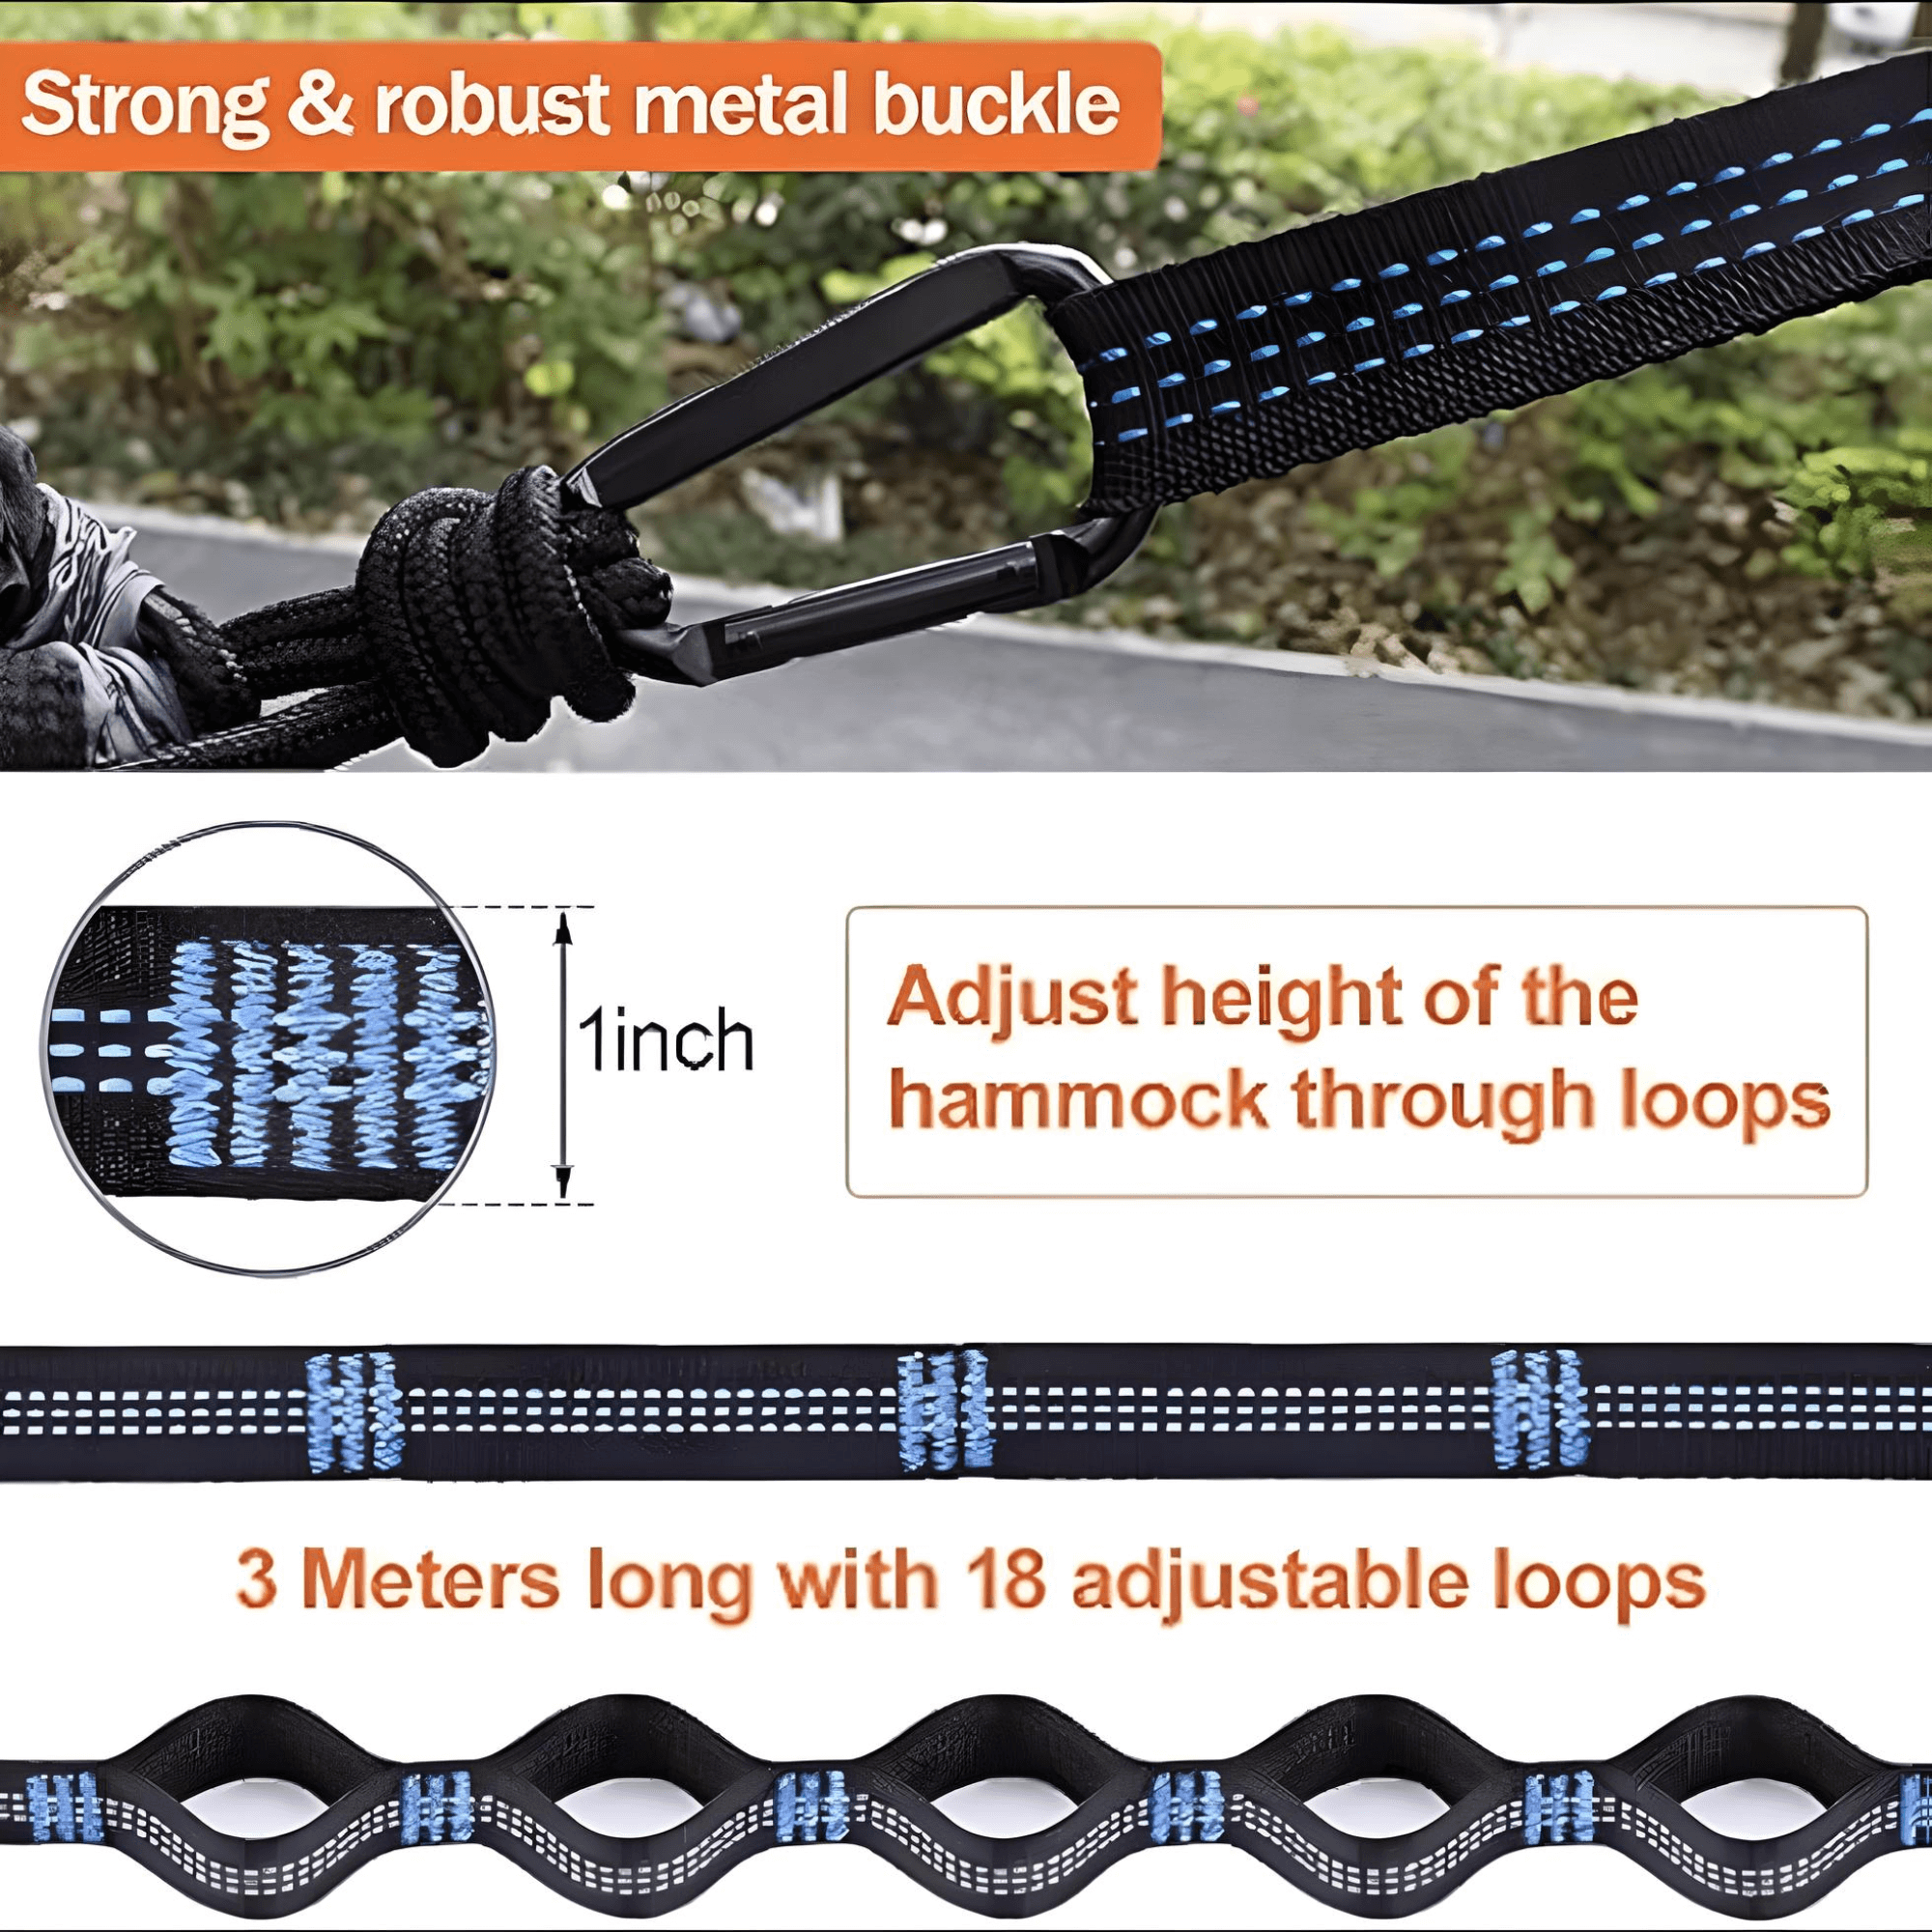 lightest-back-packing-hammock-strong-and-robust-metal-buckle